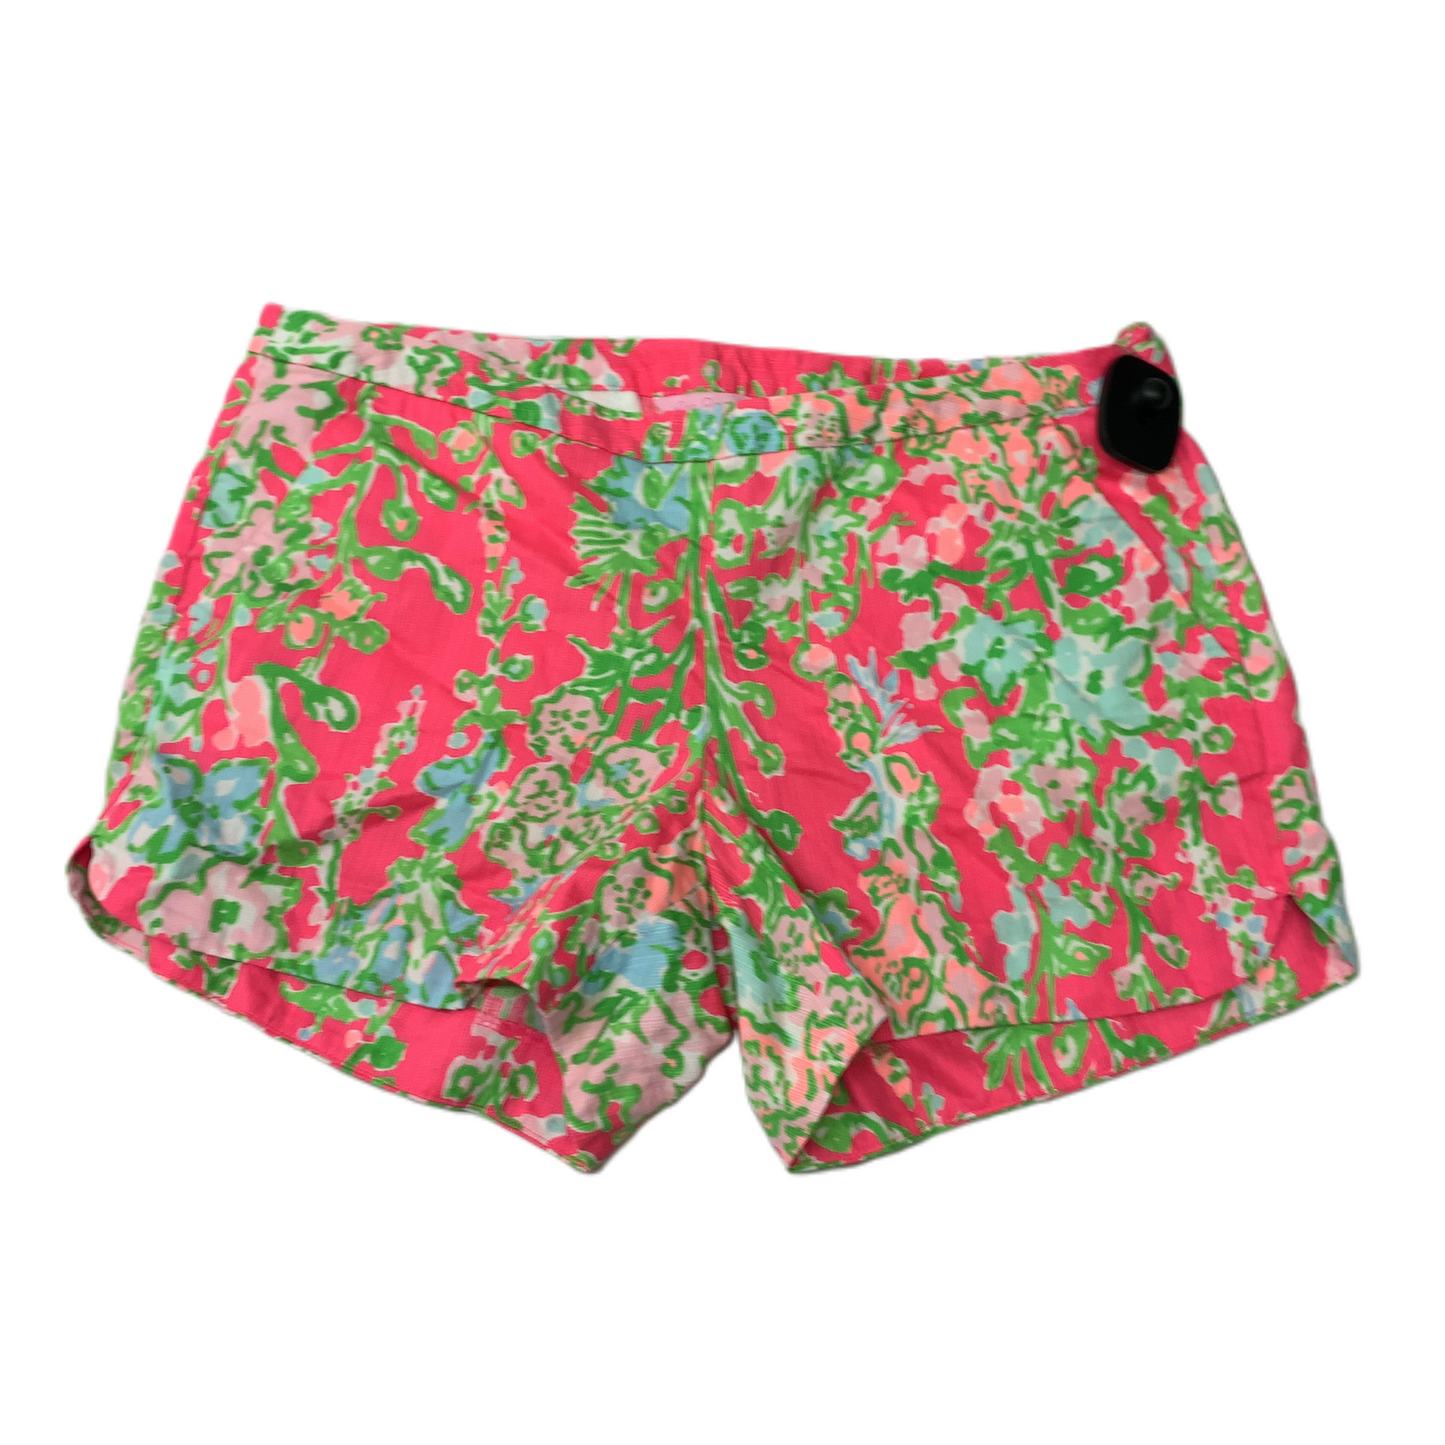 Green & Pink  Shorts Designer By Lilly Pulitzer  Size: 6